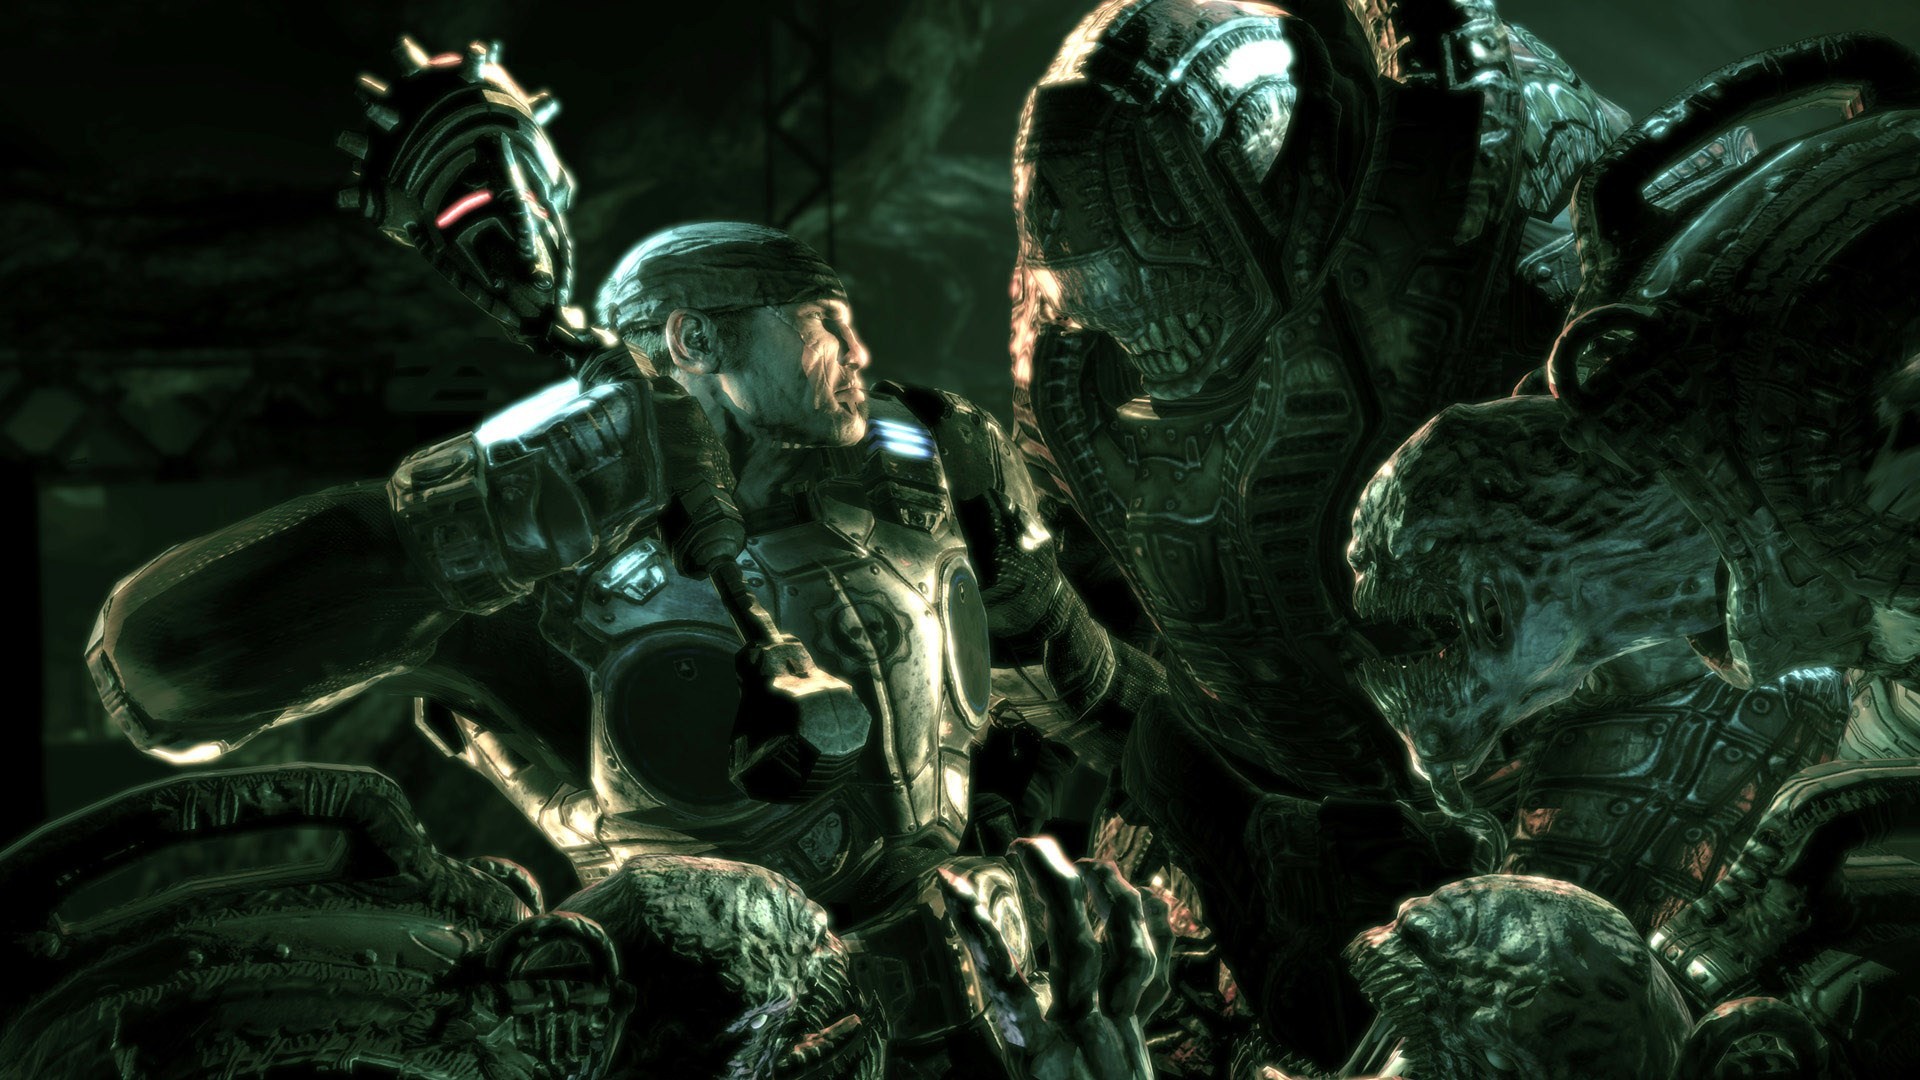 1920x1080 px gears of war 2 pictures free for desktop by Scott Young